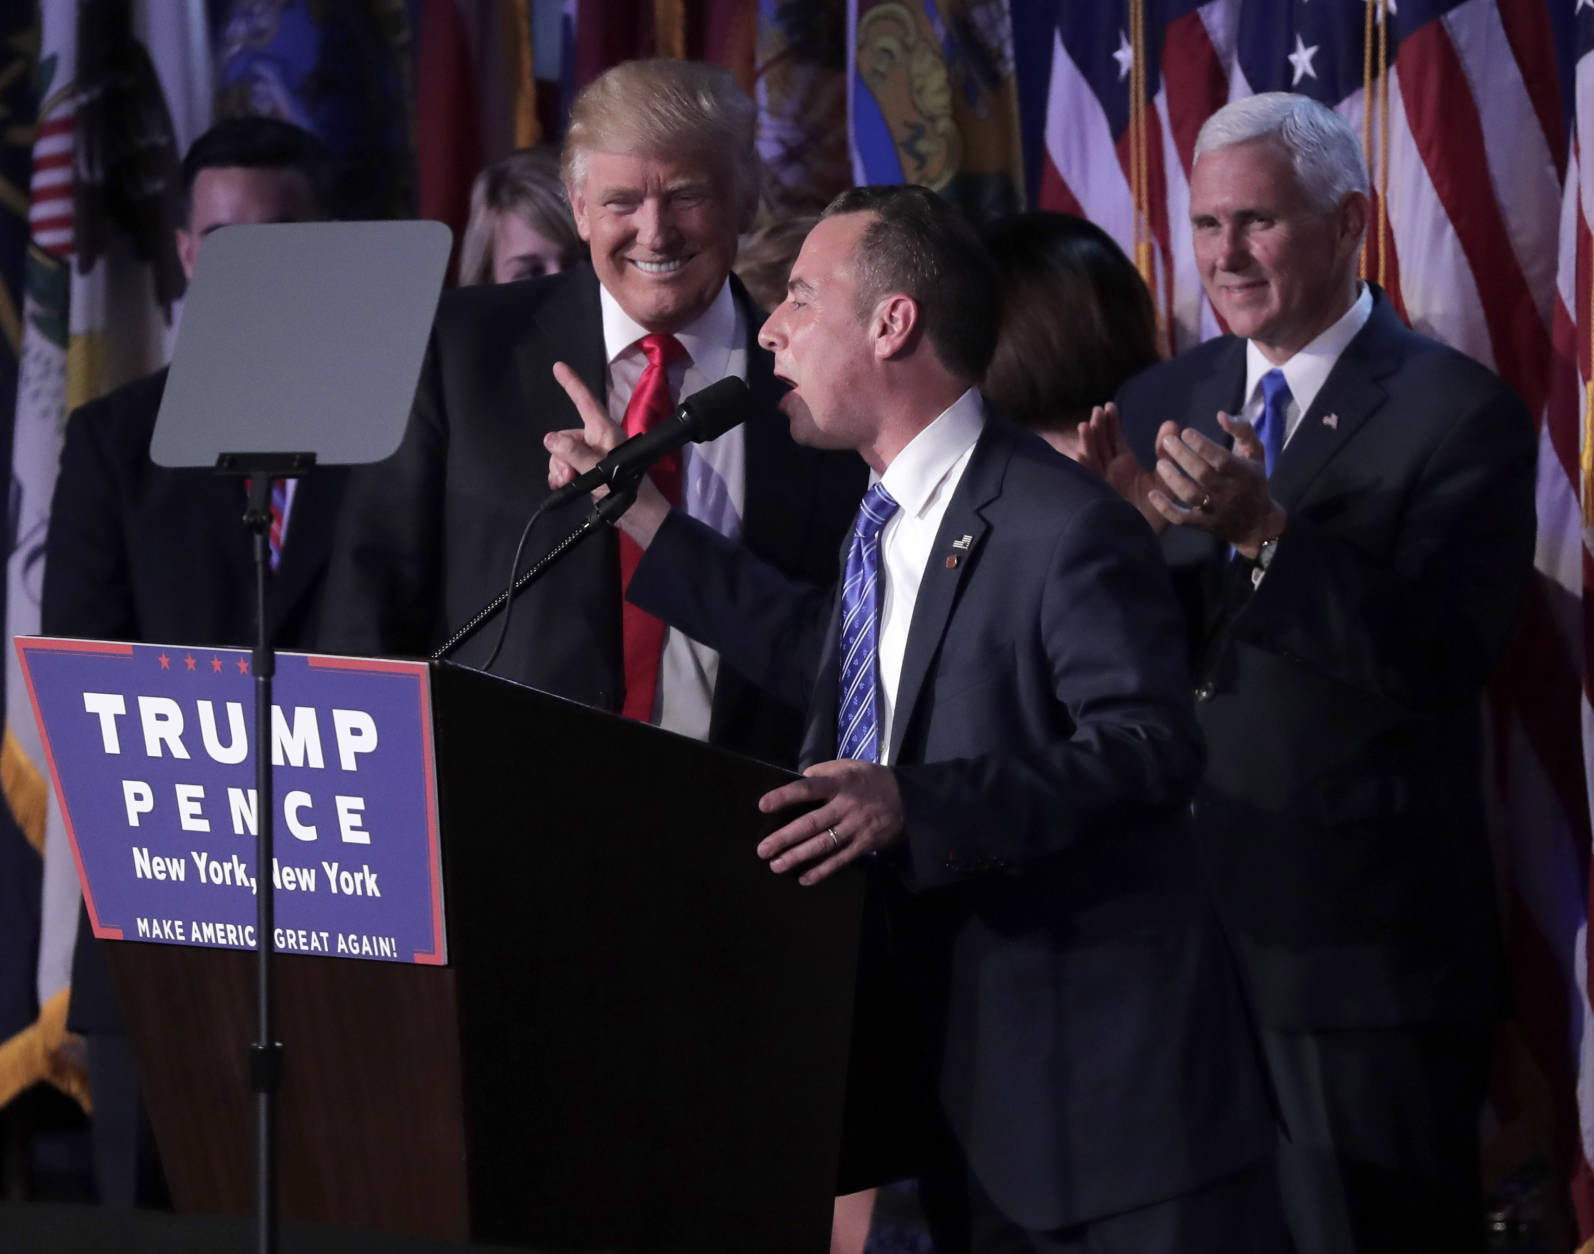 Reince Priebus, Chair of the Republican National Committee, right, speaks as President-elect Donald Trump gives his acceptance speech during his election night rally, Wednesday, Nov. 9, 2016, in New York. (AP Photo/Julie Jacobson)